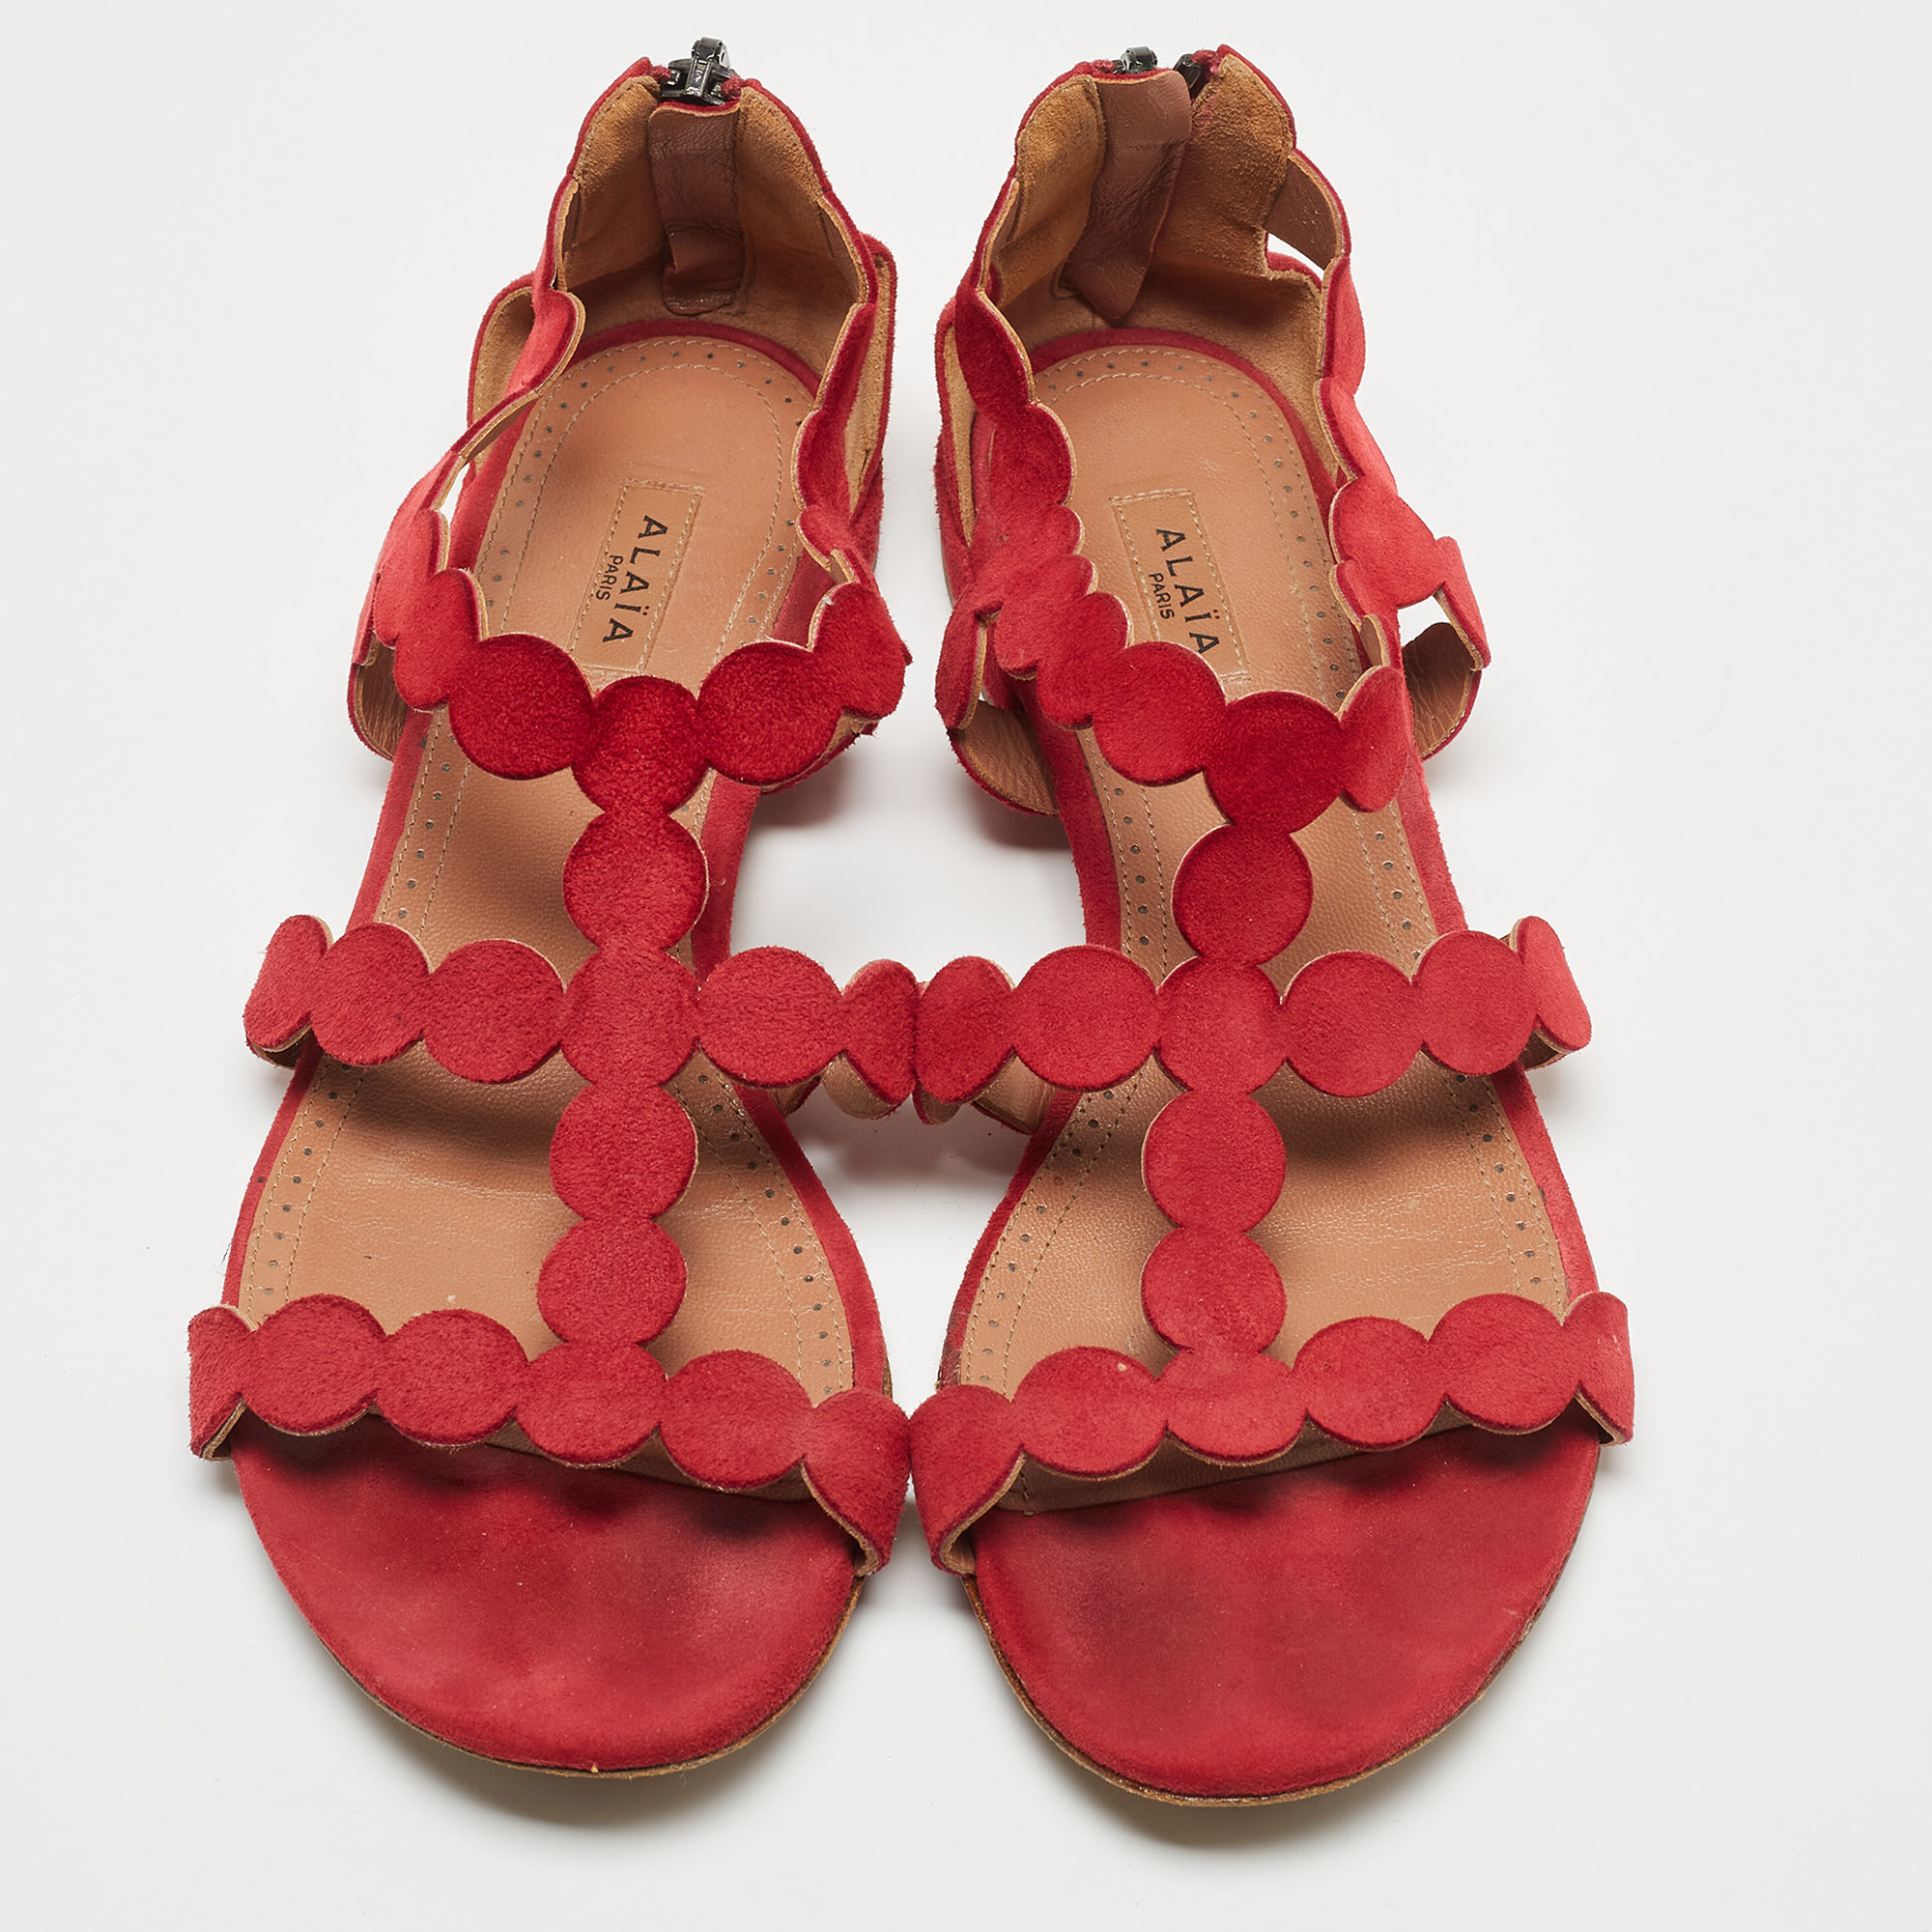 Alaia Red Suede Open Toe Flat Sandals Size 38.5